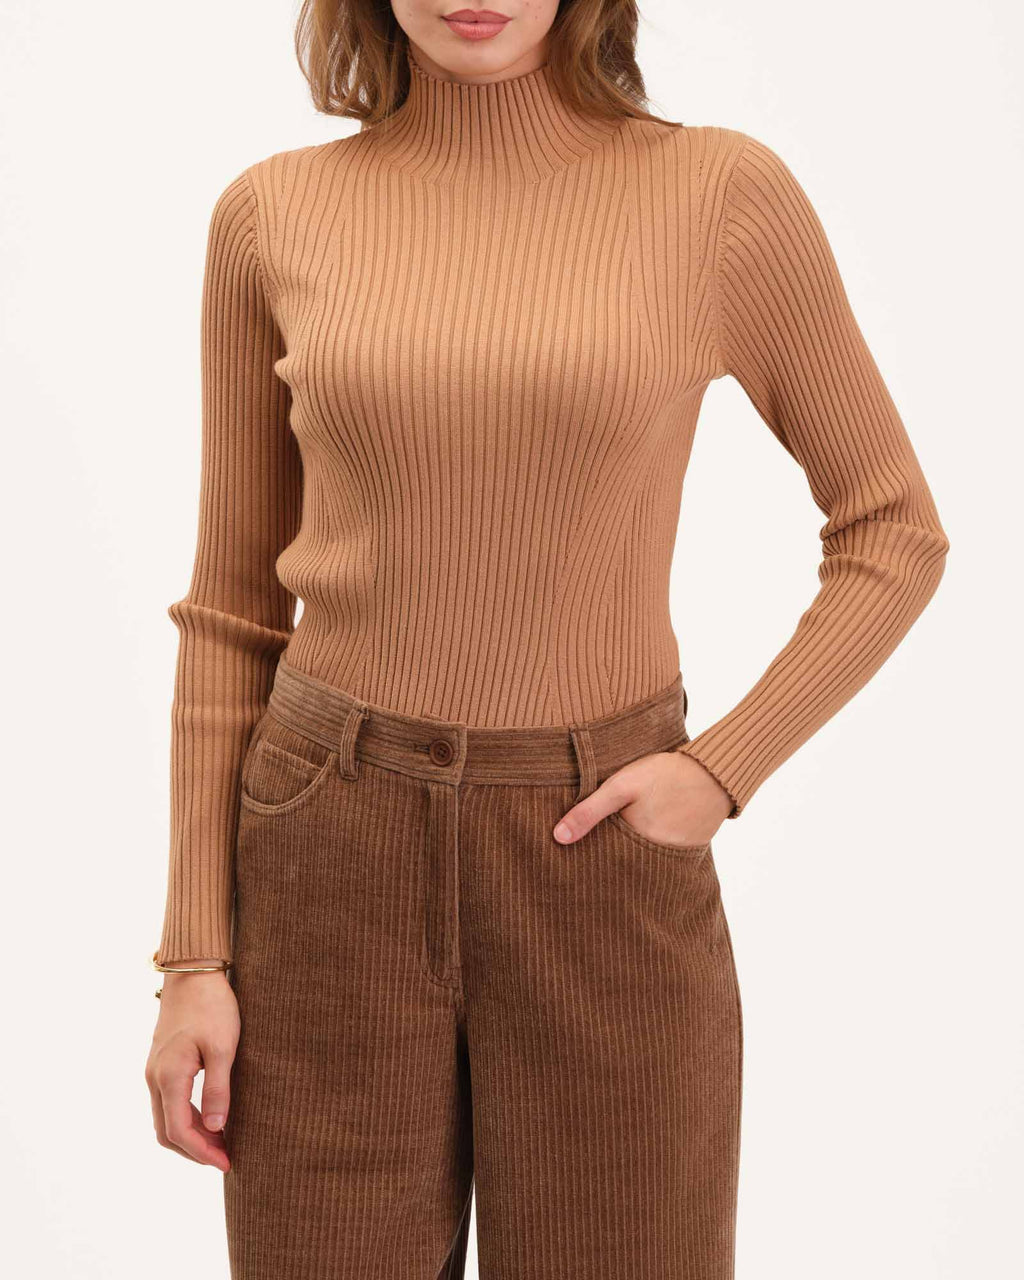 Mock Neck Crop Sweater and Sleeveless Knit Dress Set in Camel - Retro,  Indie and Unique Fashion